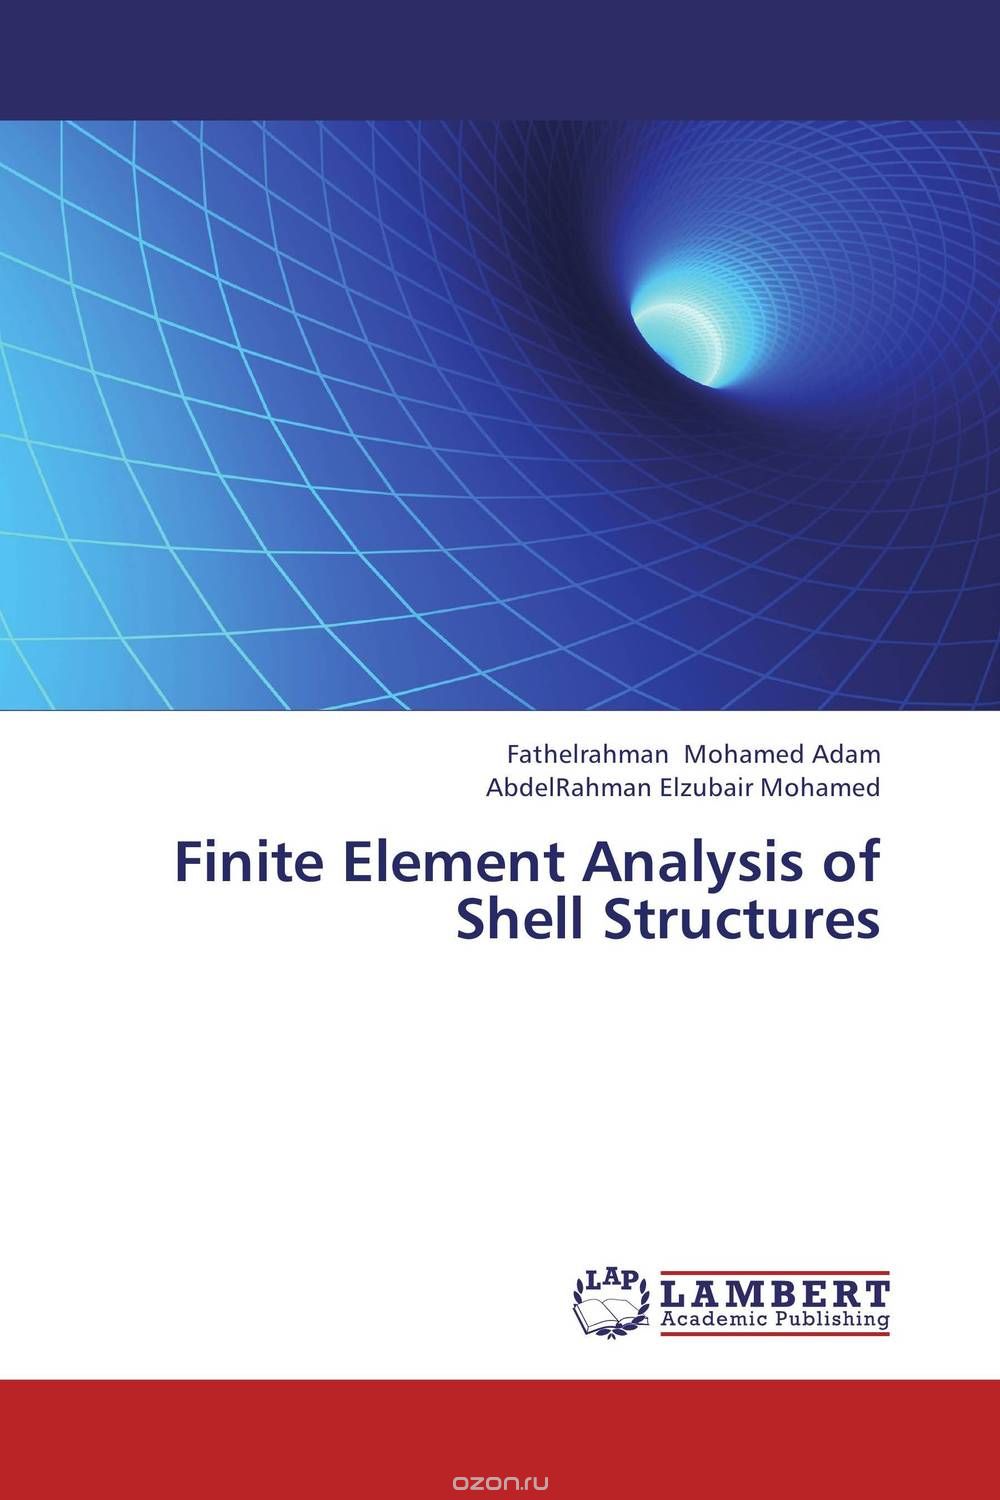 Finite Element Analysis of Shell Structures